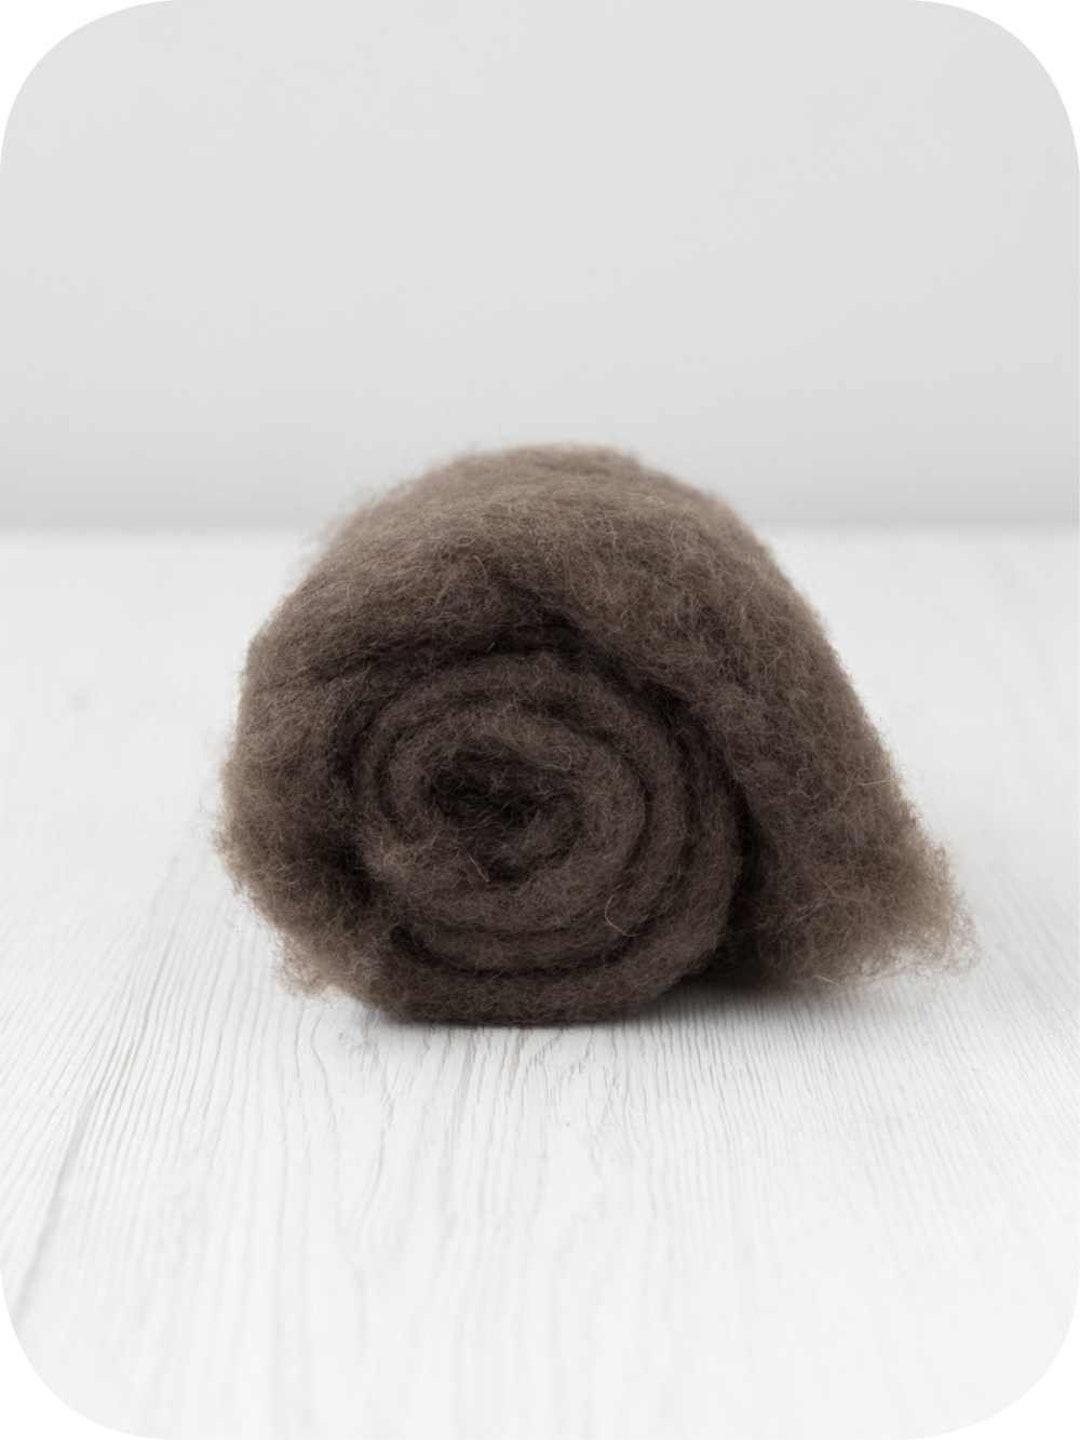 Natural Core Wool Carded Wool / Needle Felting Core Wool / Wool Stuffing -  Sold per 1 oz.